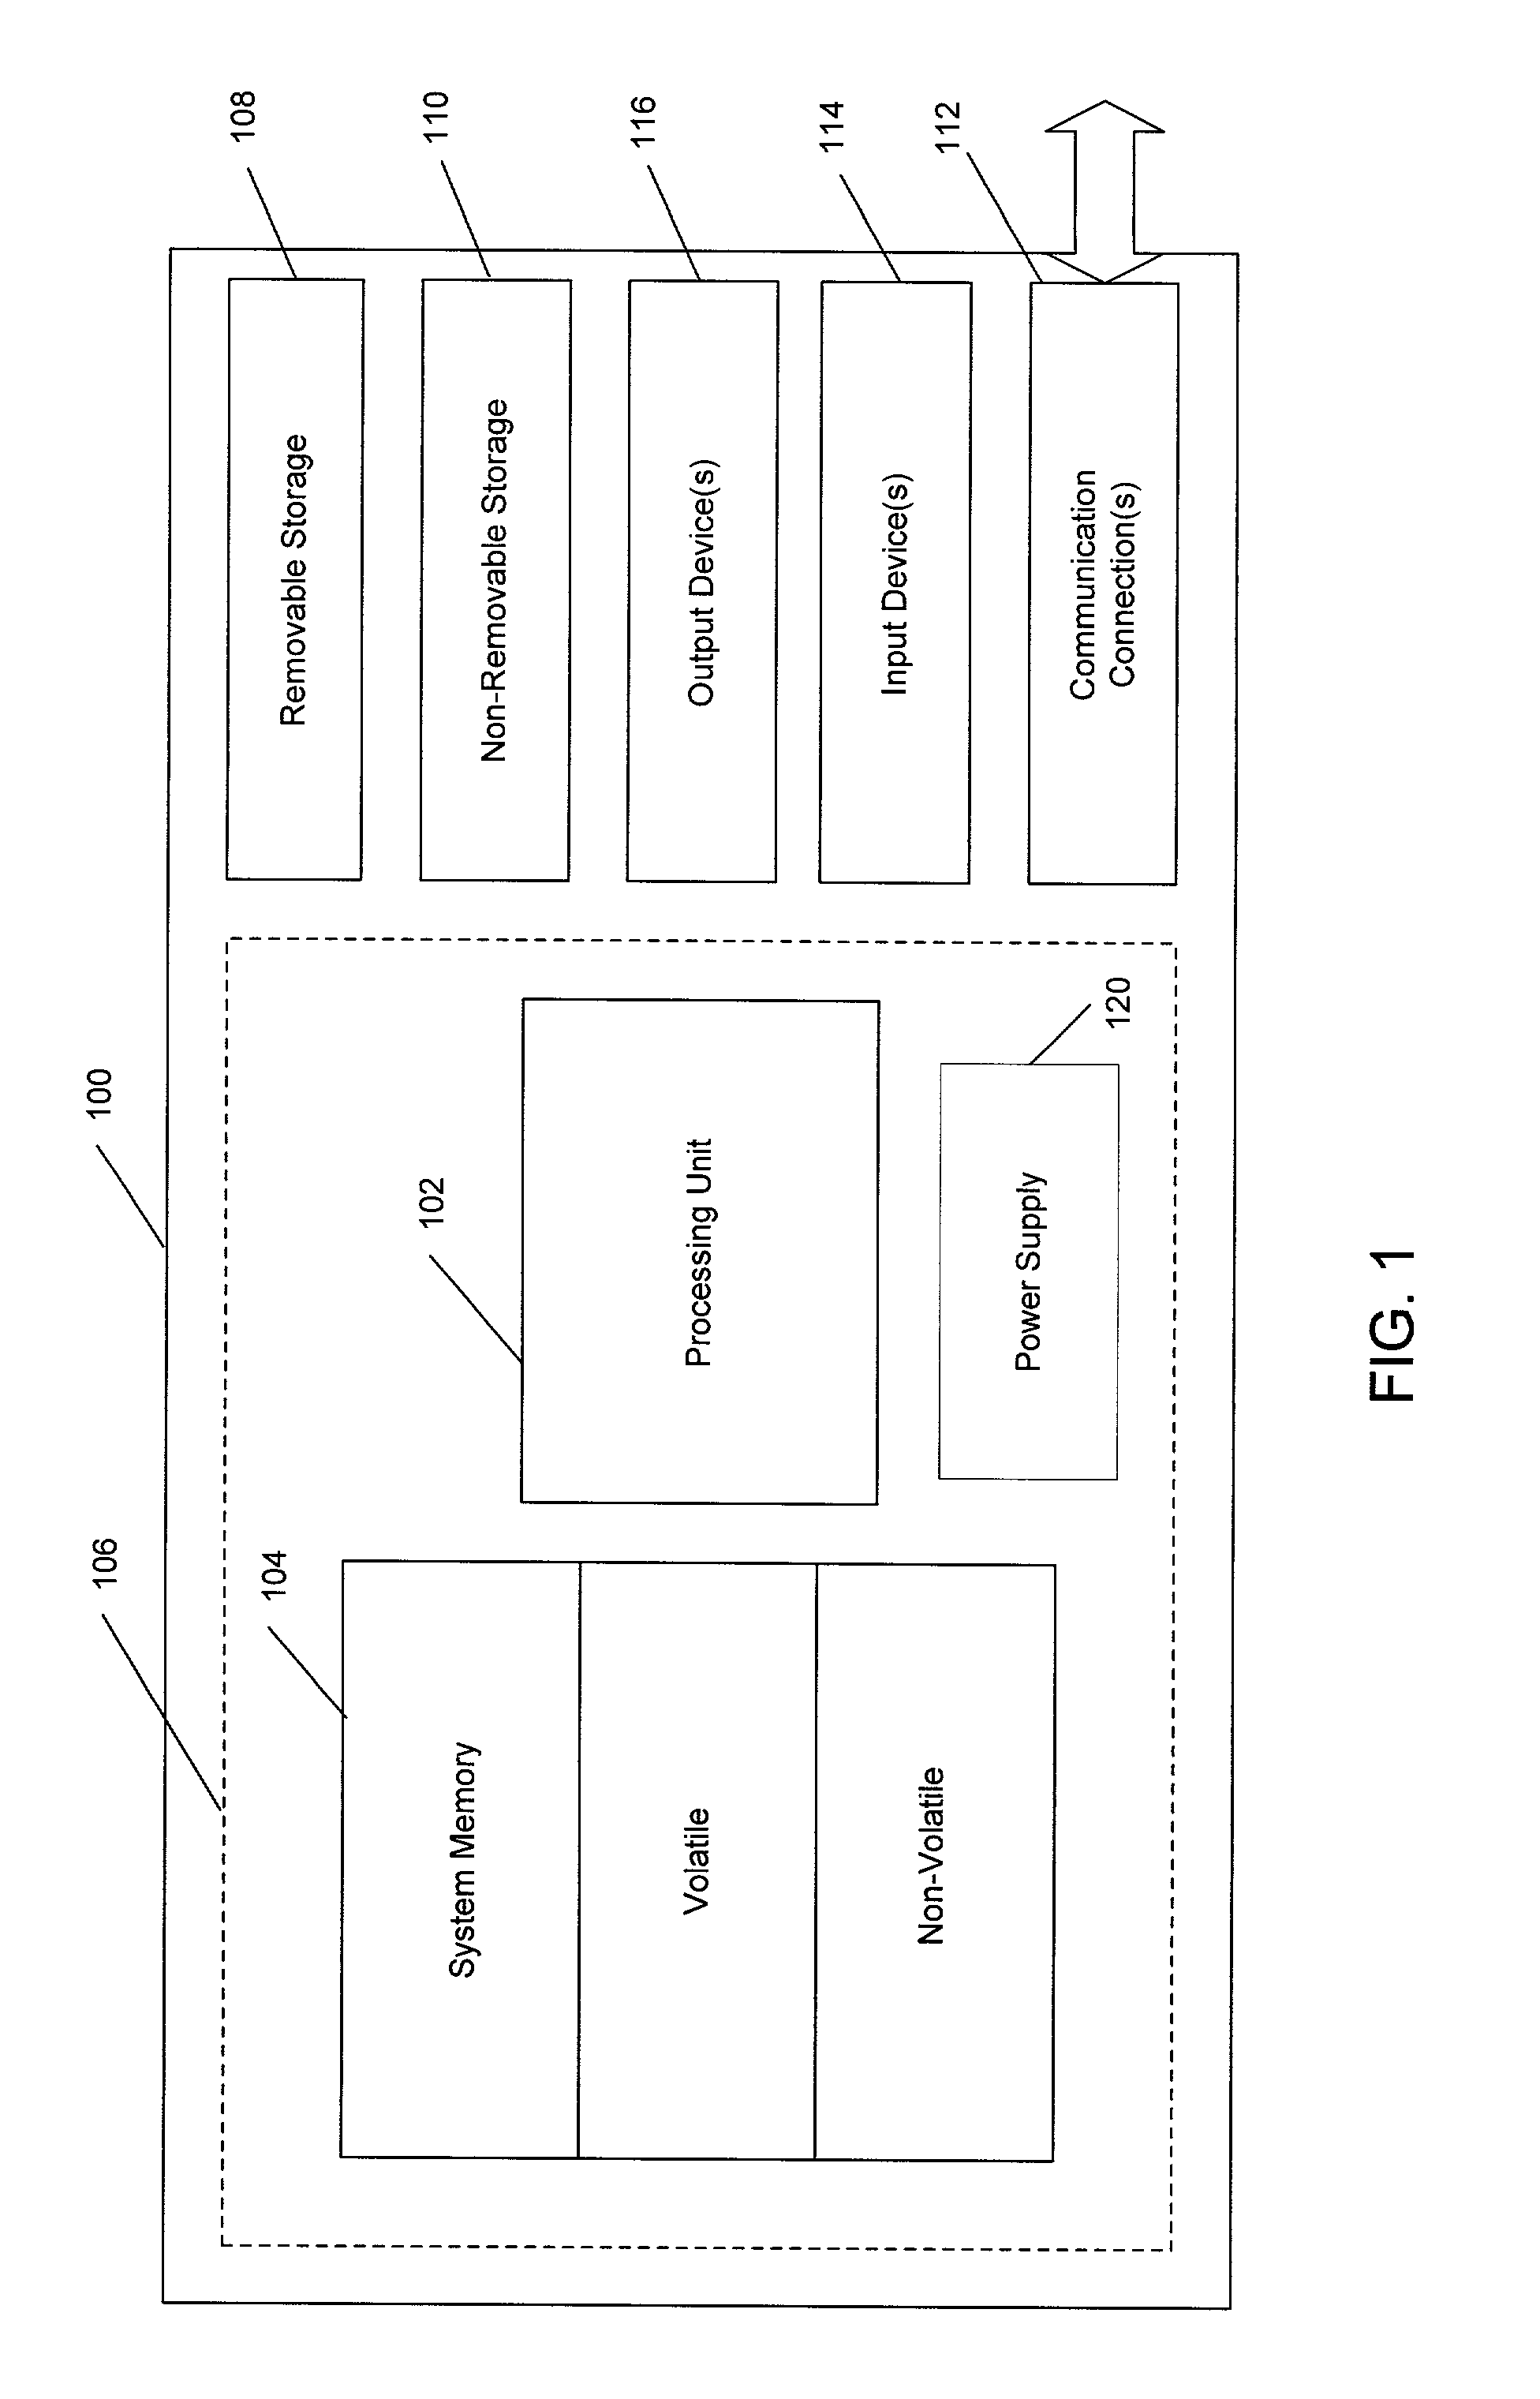 System and method for reducing power consumption for wireless communications by mobile devices